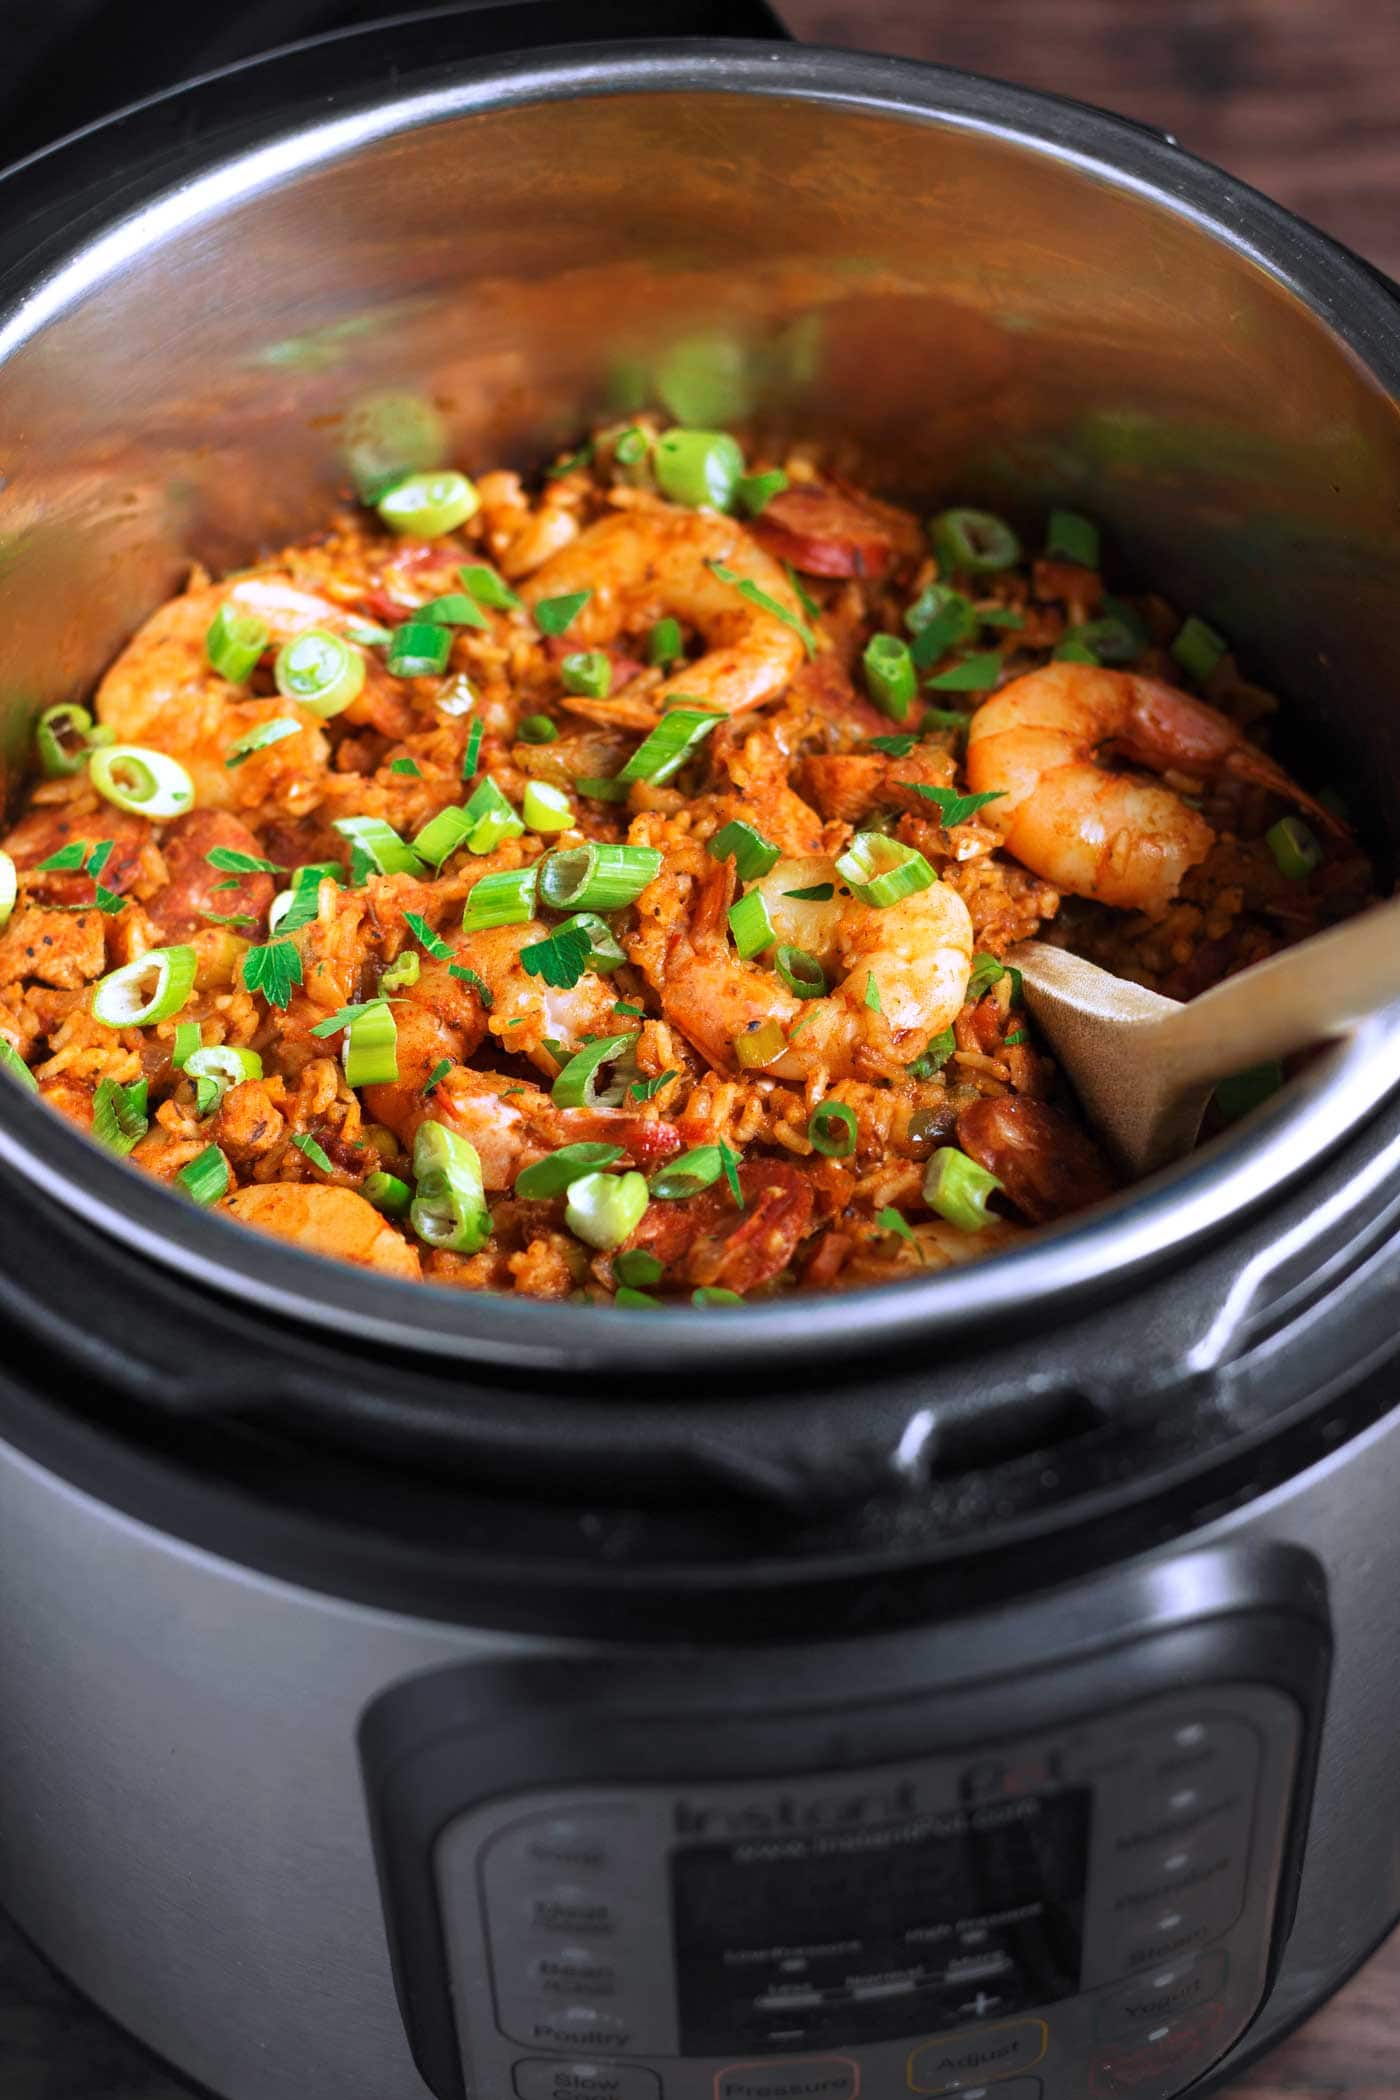 Only 15 minutes prep time to make this super simple and delicious Instant Pot Jambalaya! This shrimp jambalaya is just as tasty as the traditional version, but made simple in your Instant Pot! This healthy dinner recipe is gluten free, dairy free, and made with real food ingredients. #shrimprecipe #jambalaya #instantpotrecipe